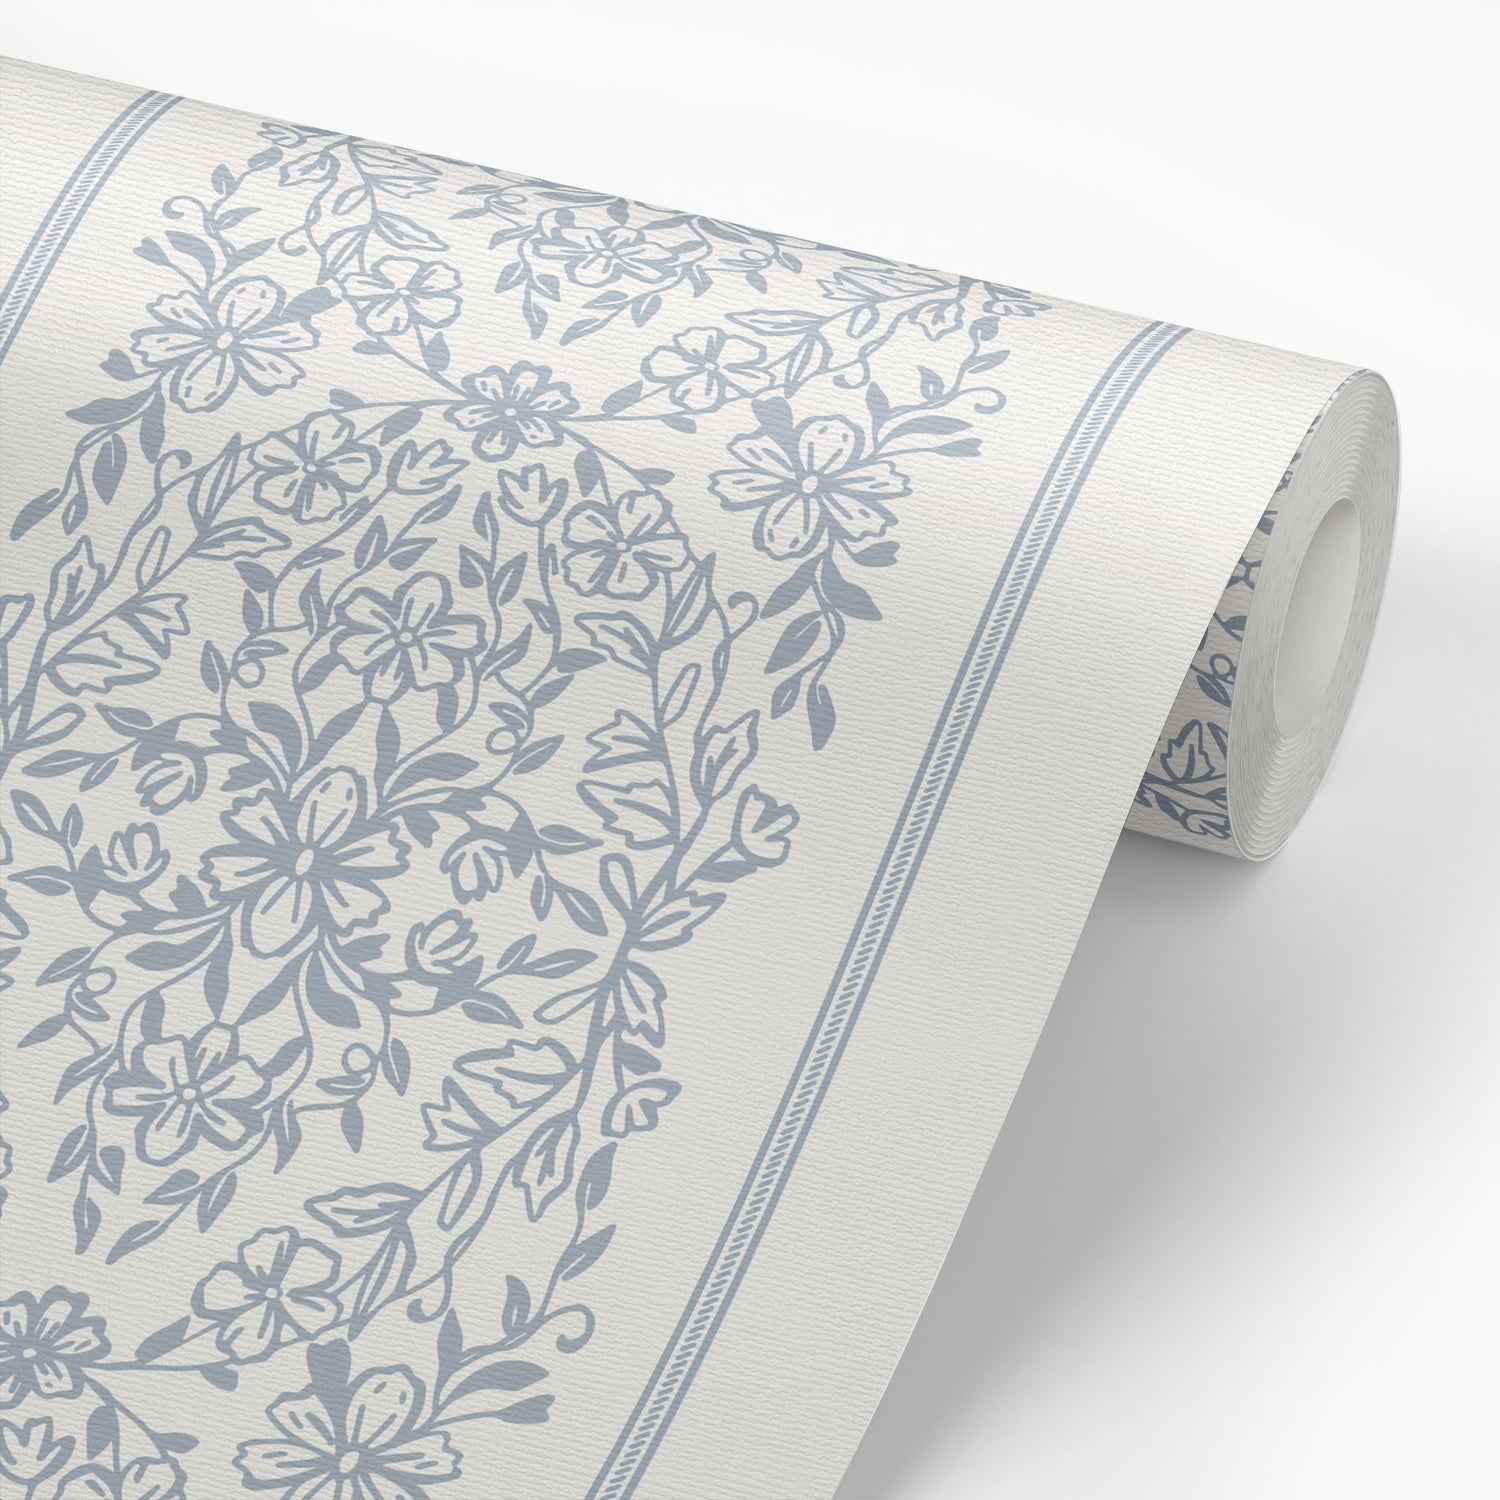 The classic and elevated design, adorned in a timeless blue hue, will add a sophisticated touch to any room. Shown on wallpaper roll.